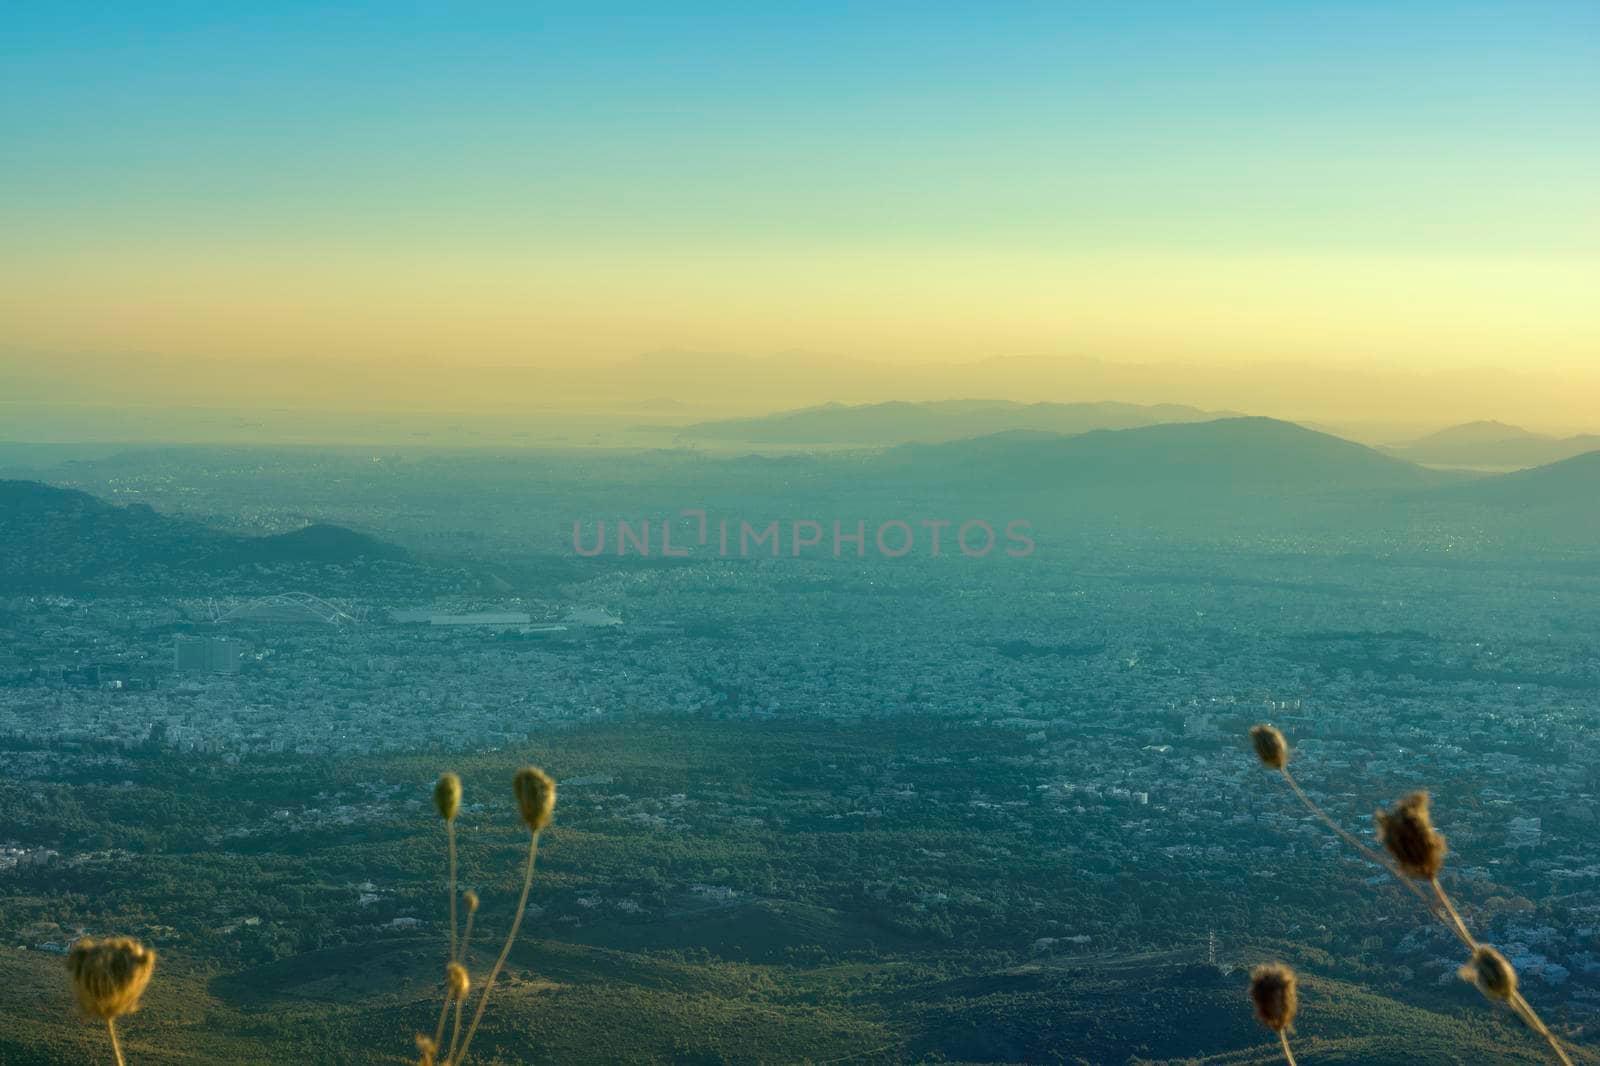 Panoramic view over Athens, taken shot from Penteli mountain at sunset by ankarb